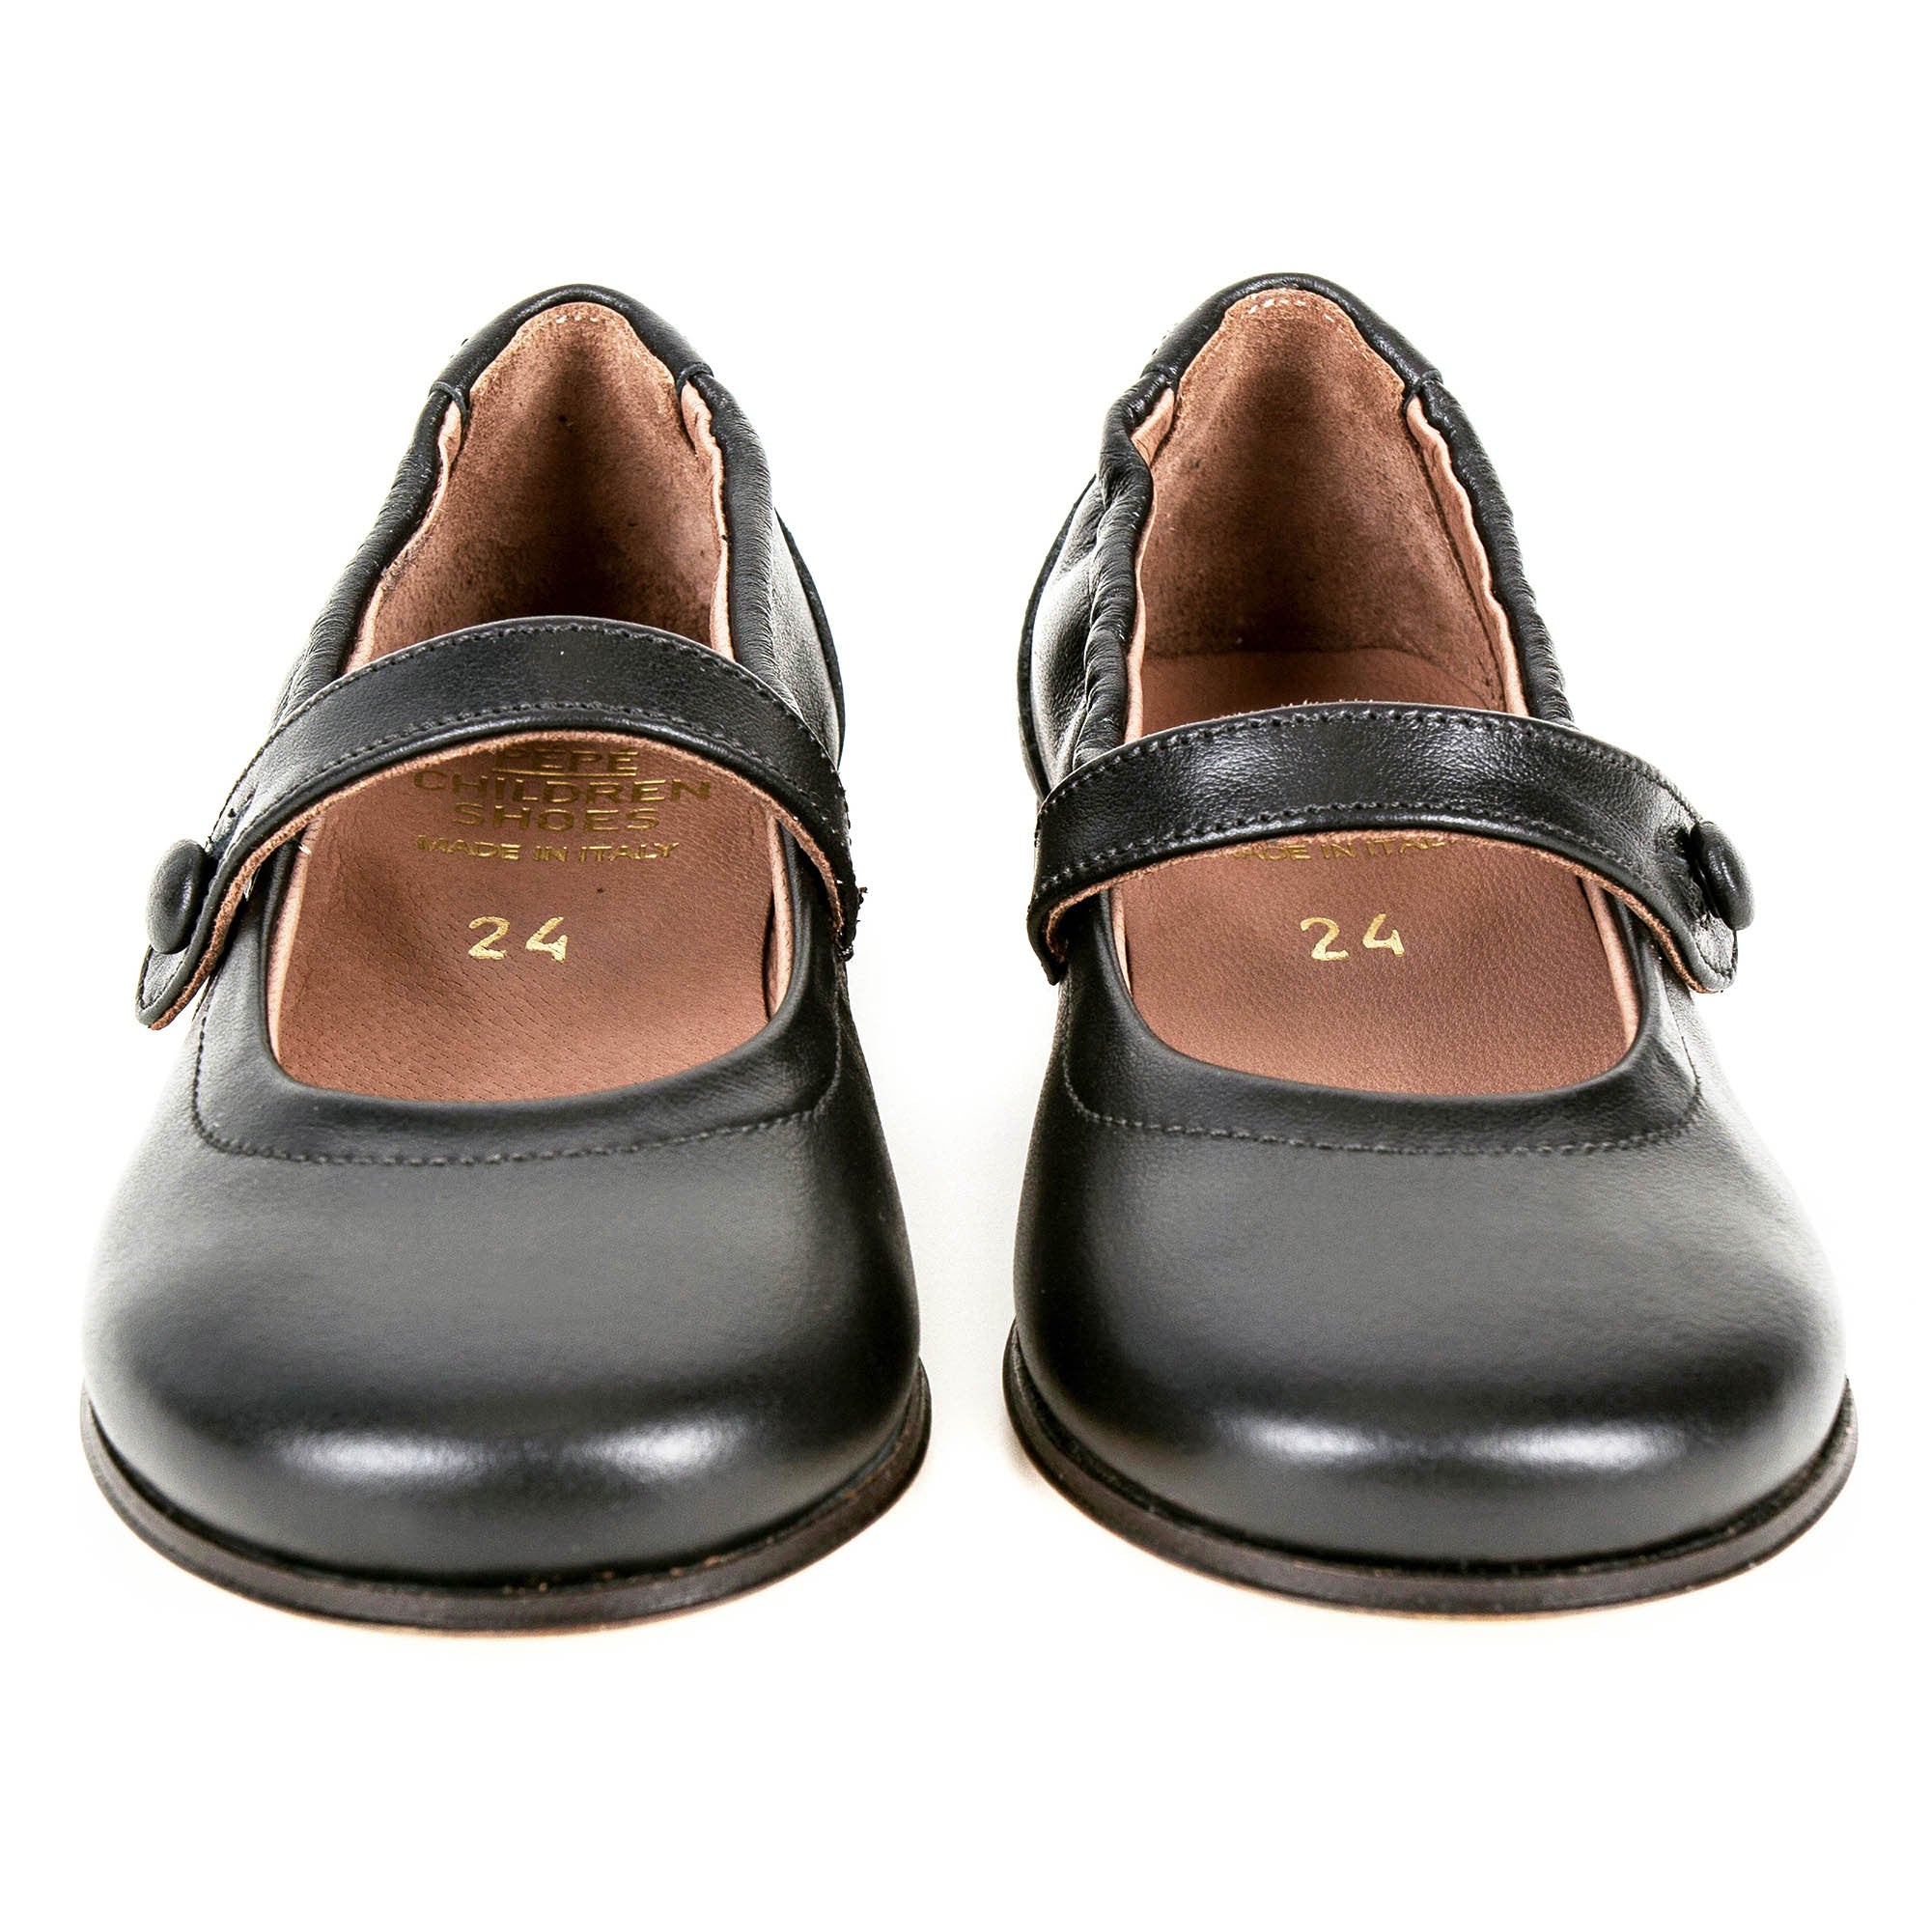 Girls Black Cowskin Leather Shoes